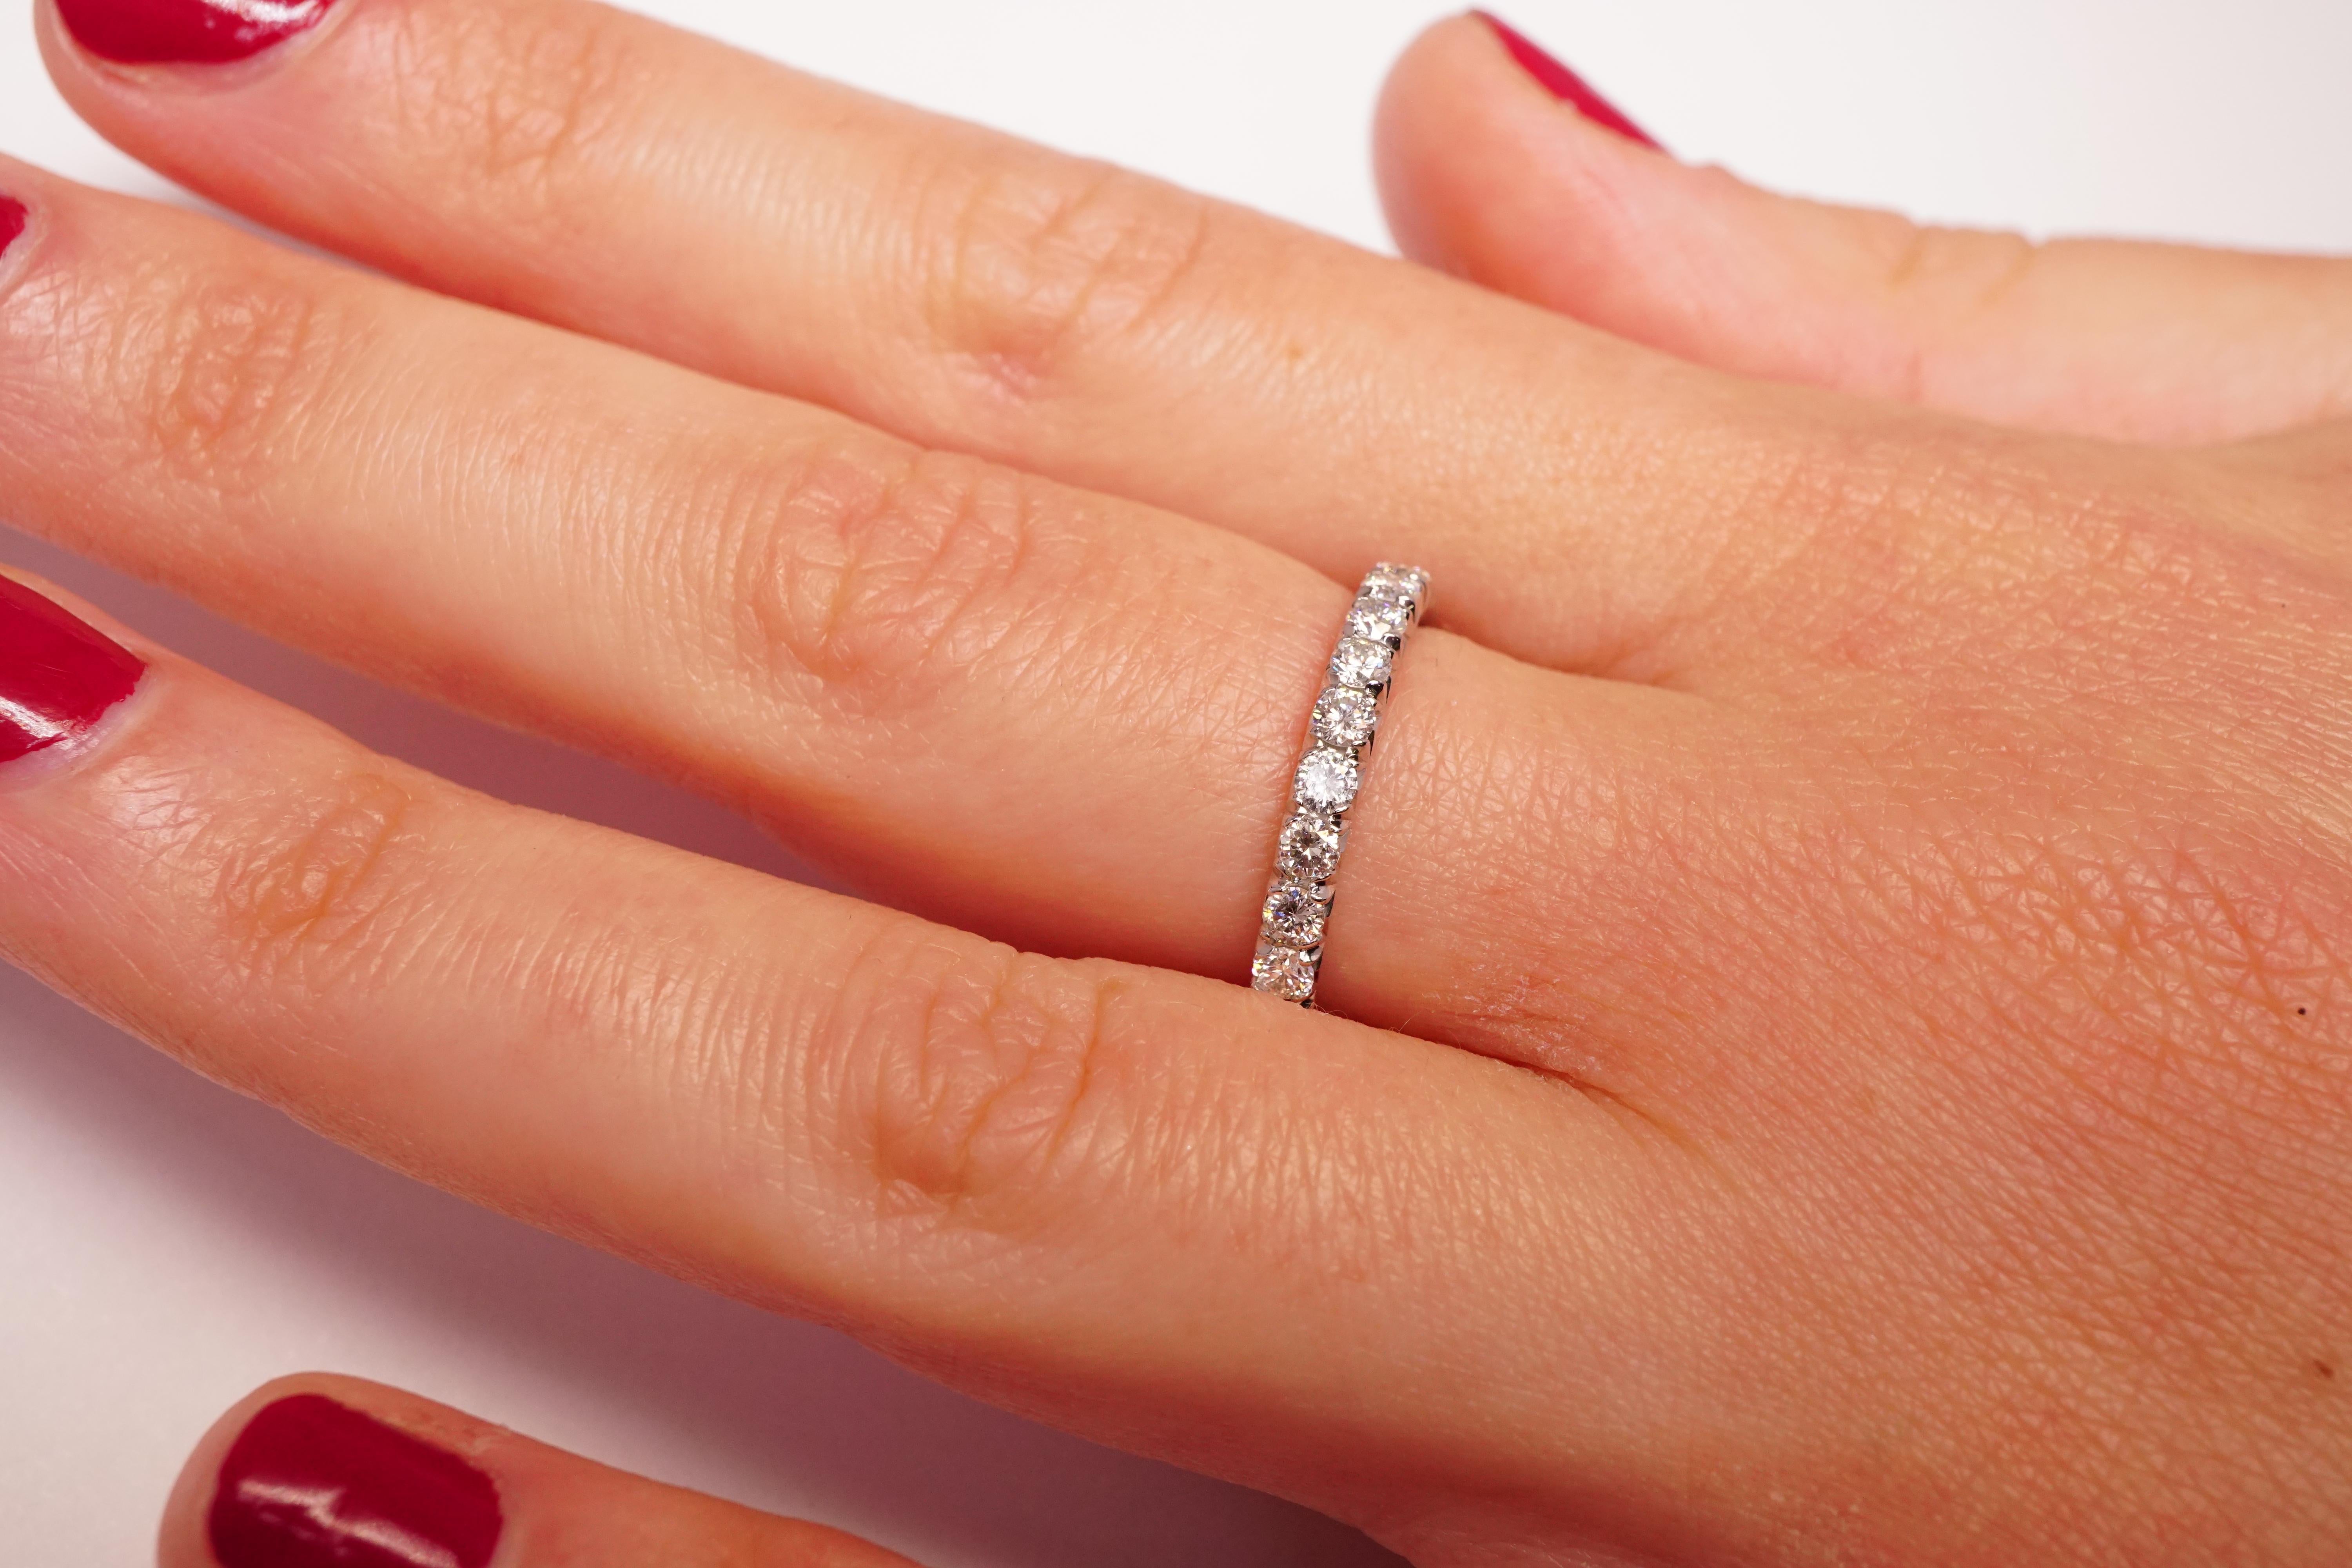 Diamond Eternity Wedding Band set in Platinum. 25 French cut micro-pave set brilliant round diamonds are F-G VS2. Carat weight = 1.5ct. Total ring weight 4 grams. Ring size 5.25. Can be sized upon request. This ring is customizable, price may vary